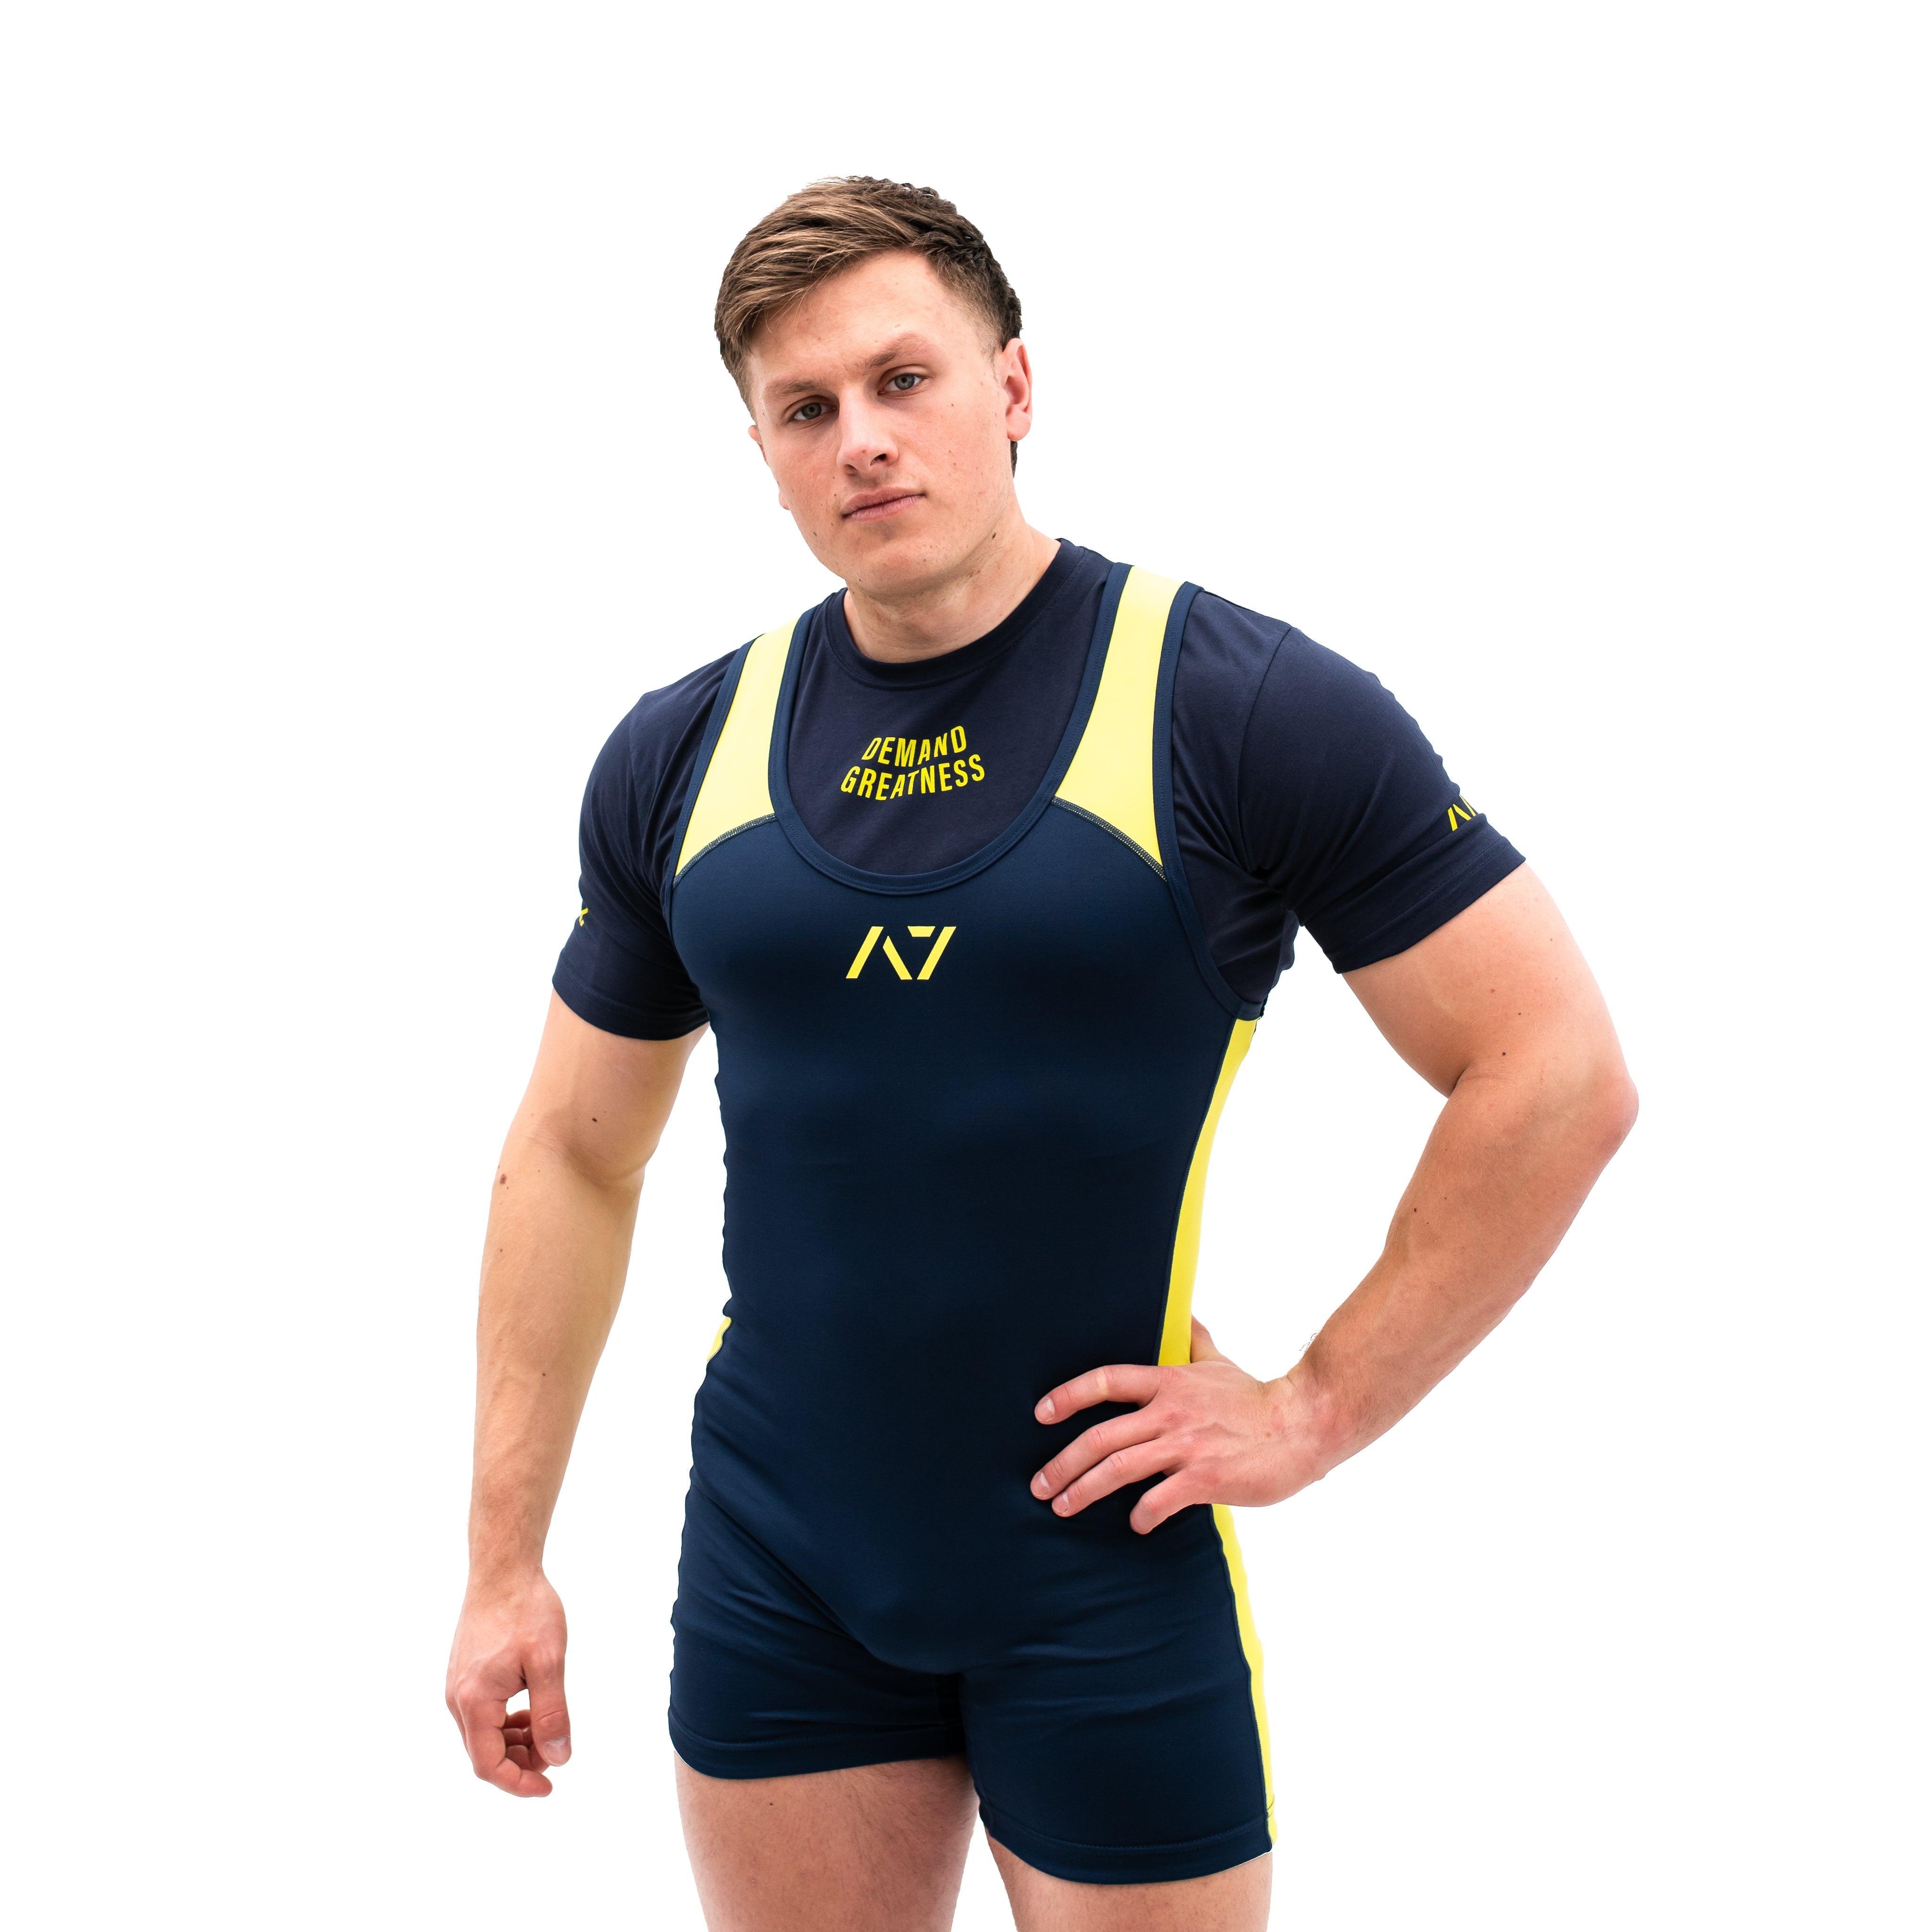 A7 Electric Lemonade IPF Approved Powerlifting Singlet is designed exclusively for powerlifting. The pop of lime green adds electricity to power up your lifts and stand out on the platform. It is very comfortable to wear and feels soft on bare skin. A7 Electric Lemonade Powerlifting Singlet is made from breathable fabric and provides compression during your lifts. The perfect piece of IPF Approved Kit! A7 UK shipping to UK and Europe.